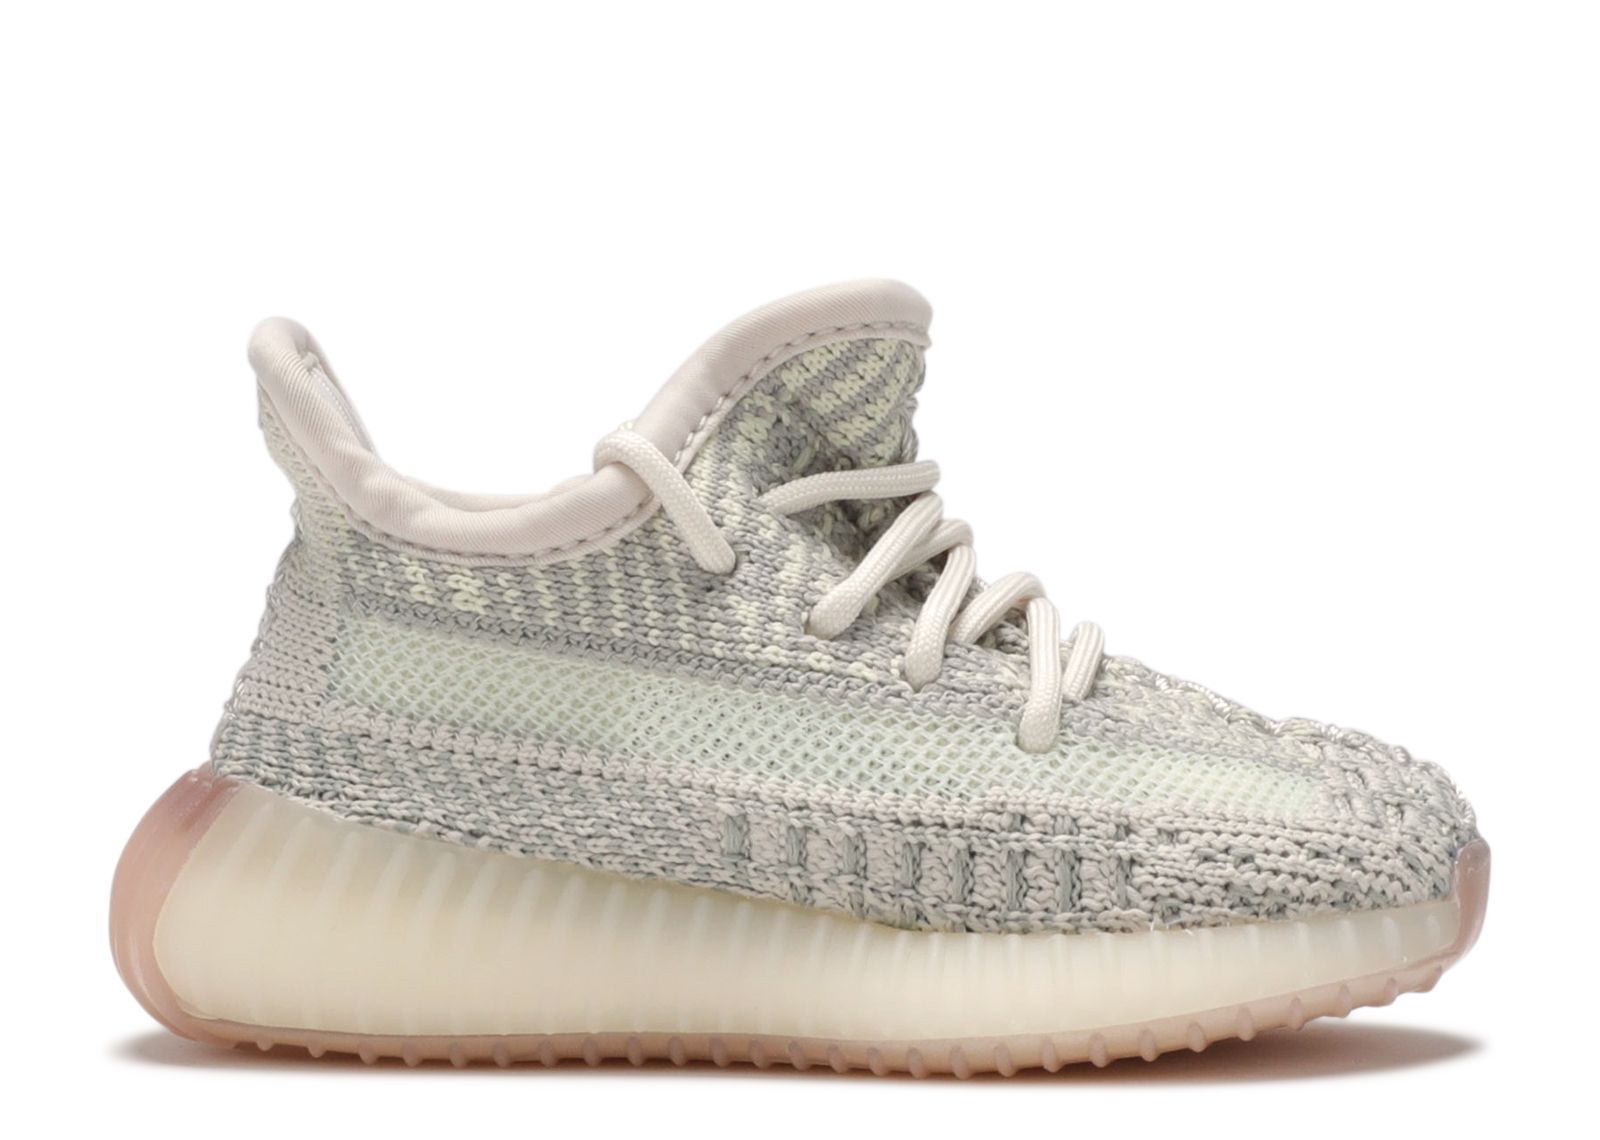 Yeezy Boost 350 V2 Infant 'Citrin Non Reflective' - Adidas